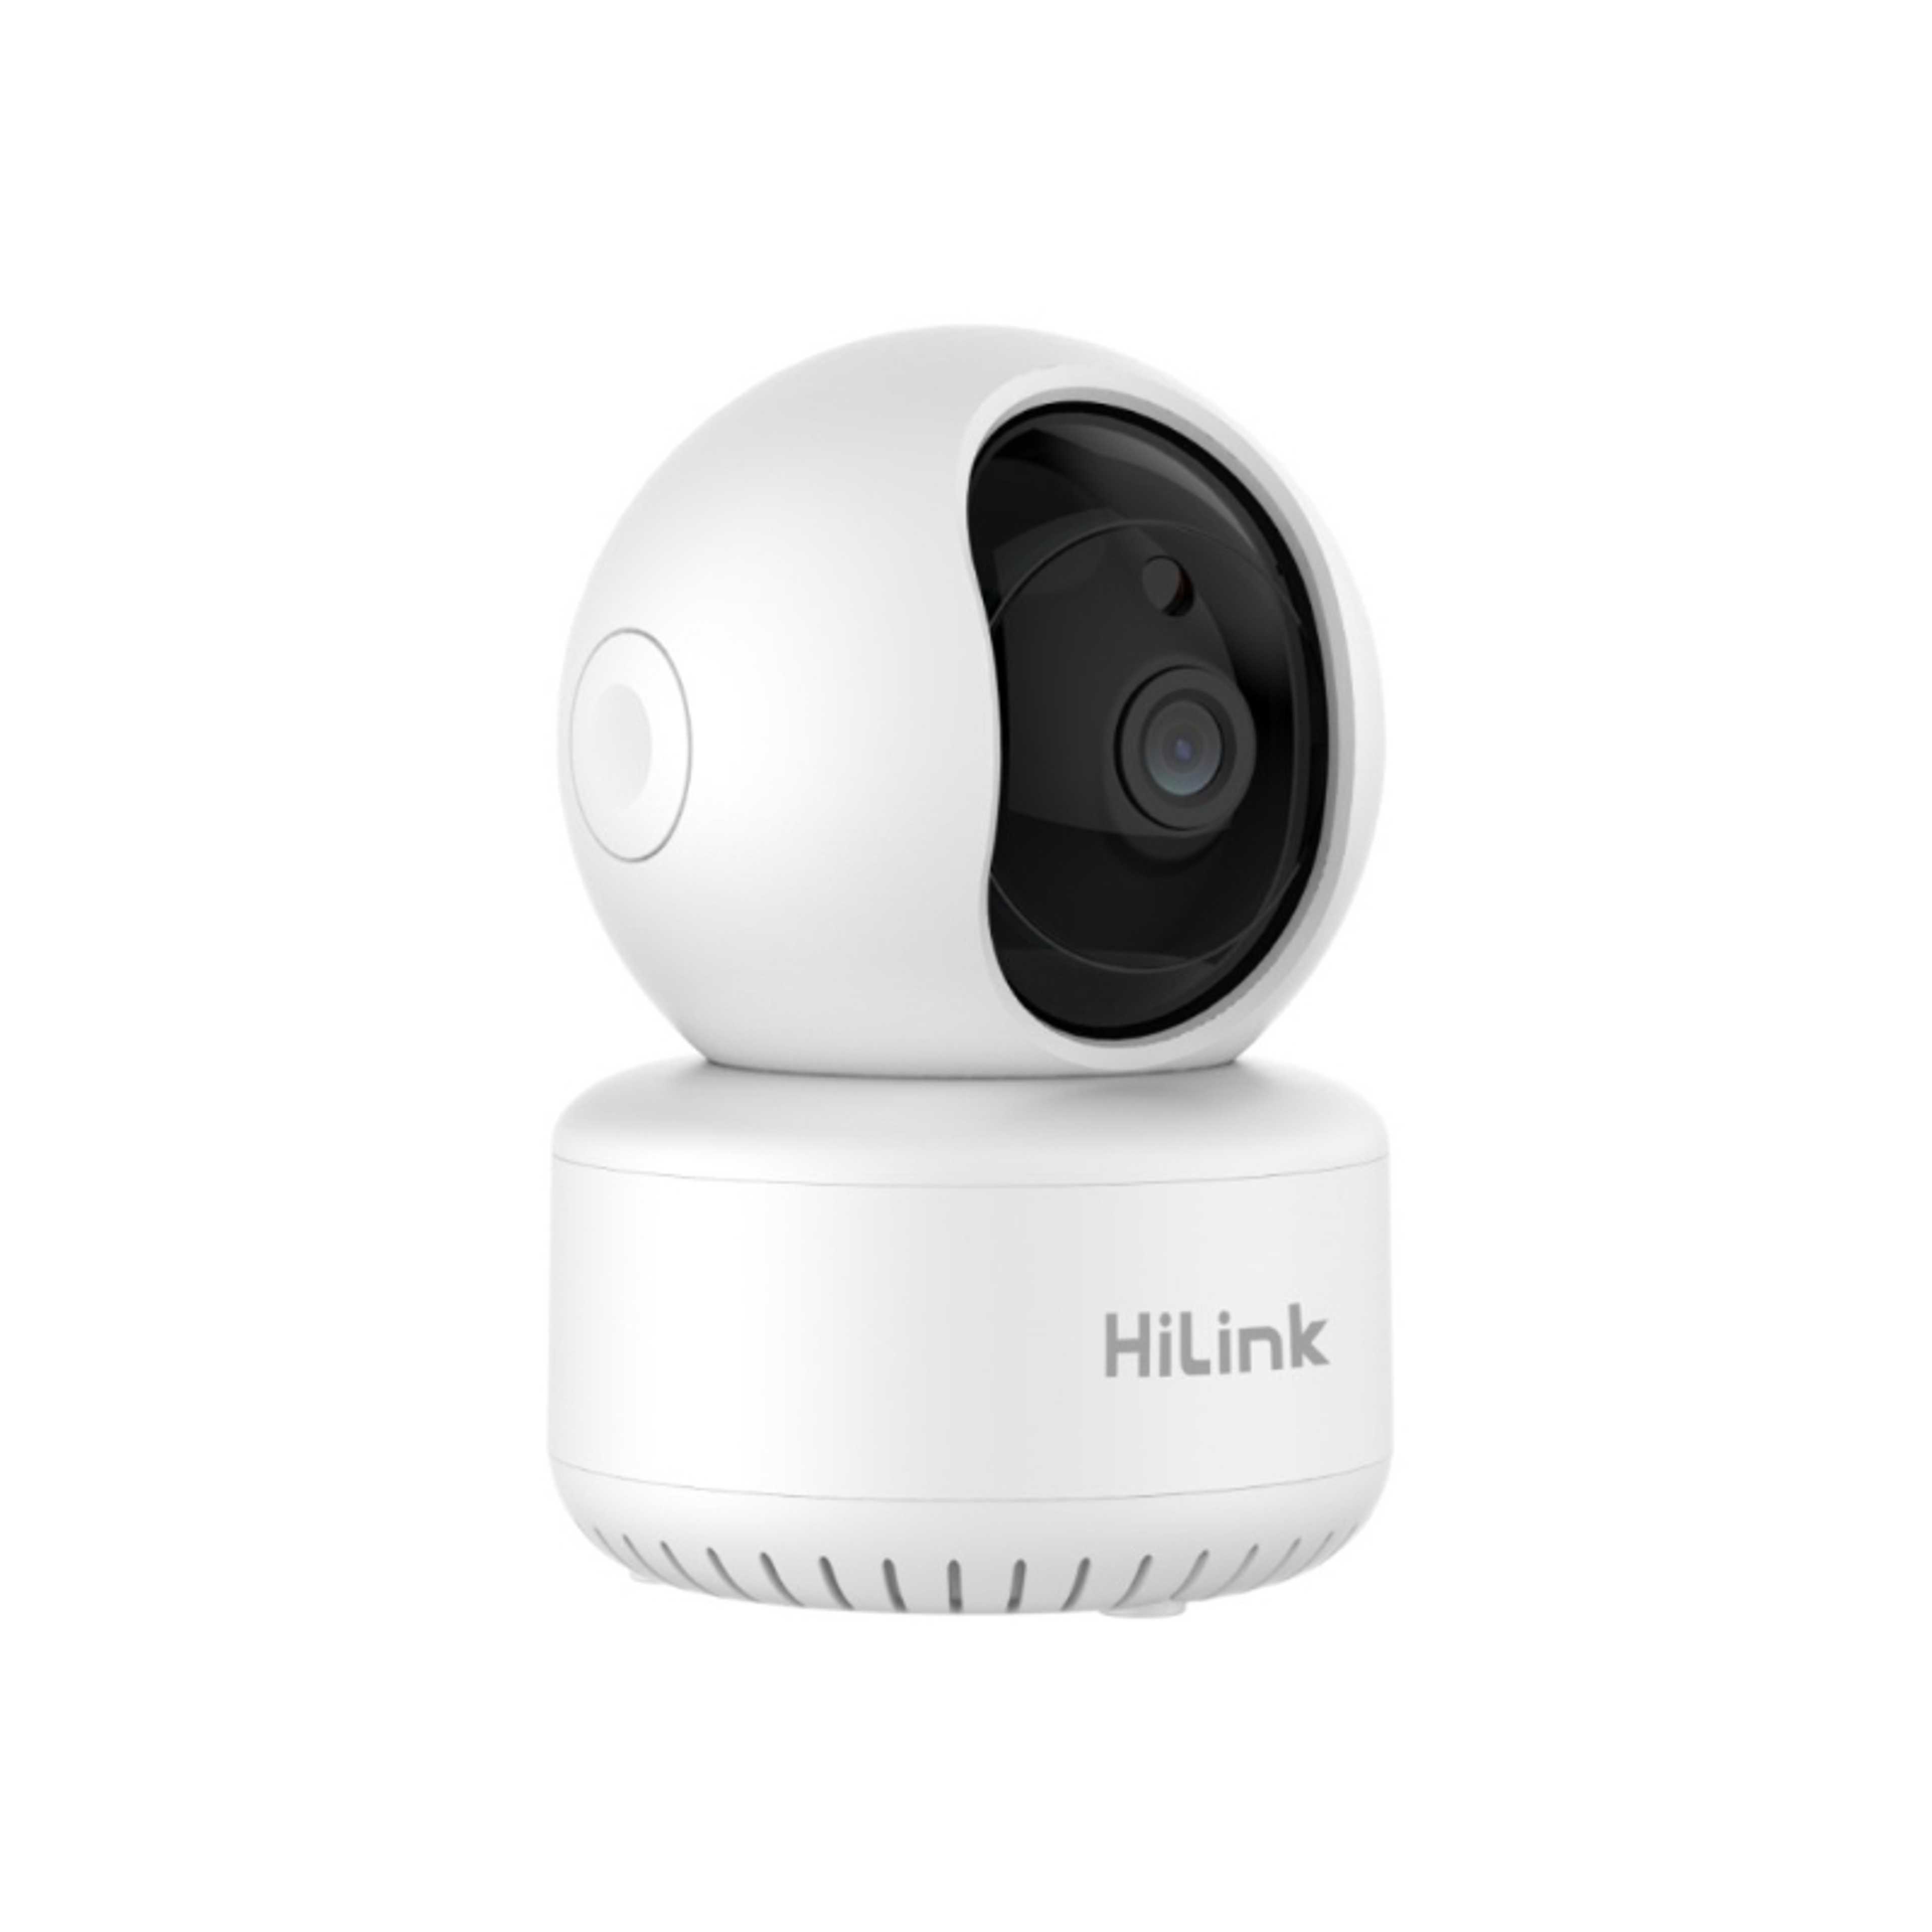 Hilink 3MP WiFi CCTV Home Security Camera 360 Rotatable - IR Night Vision - Two Way Audio - AI Human Detection - Cloud Storage -SD Card Slot - Push Notification- ICSEE (White)